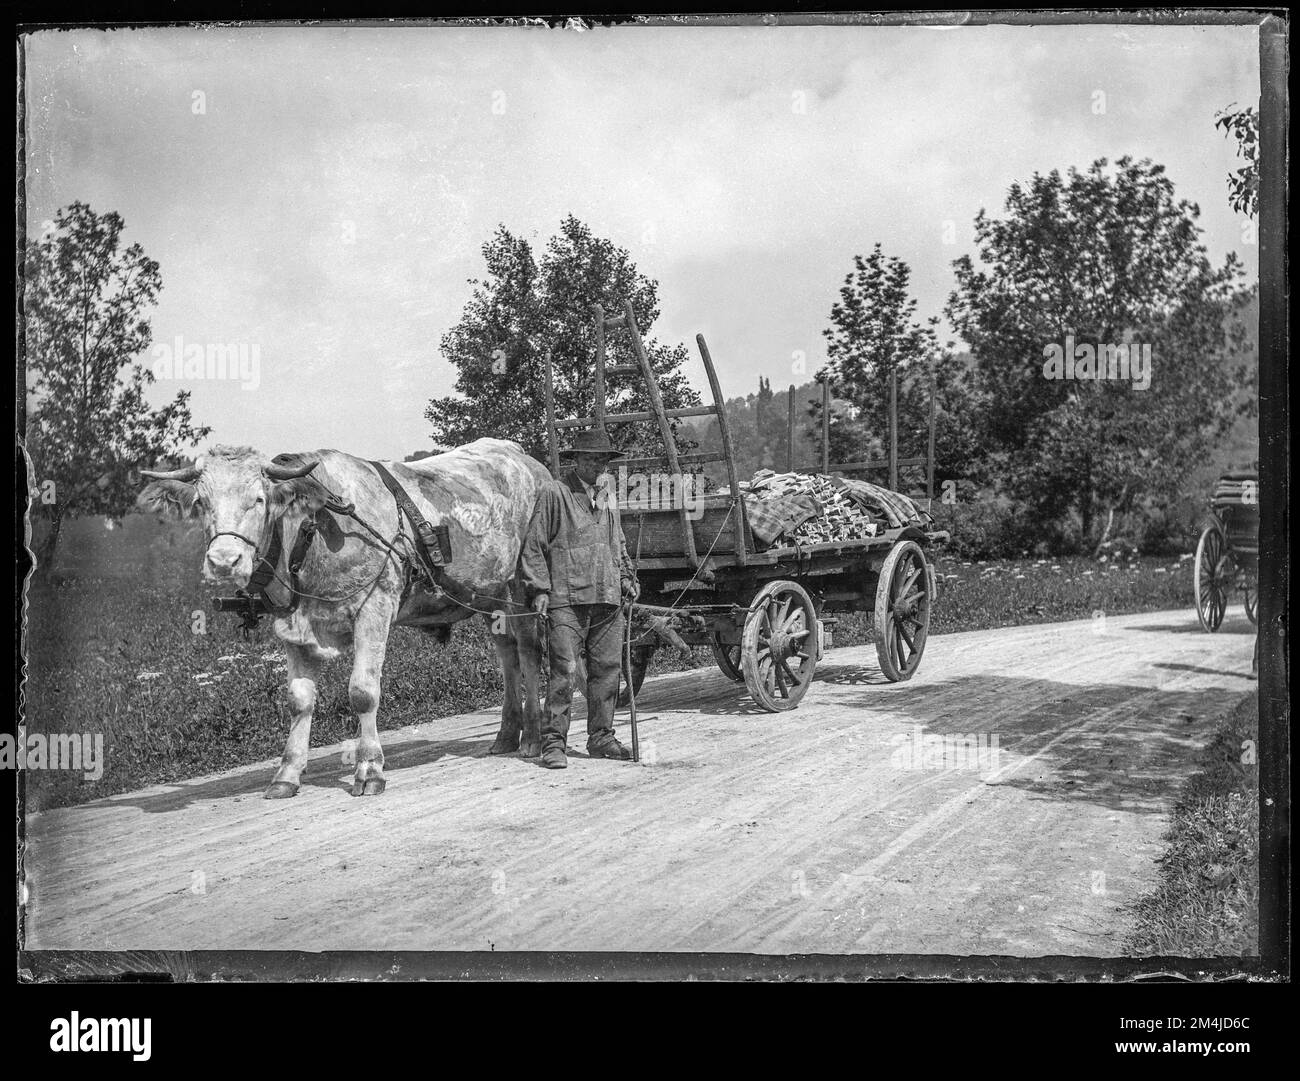 Digitised archive copy of an original quarter-plate glass negative.  Bullock cart on road with load of wood.  Believed to be in Switzerland and to date from late 19th century or early twentieth century. Stock Photo